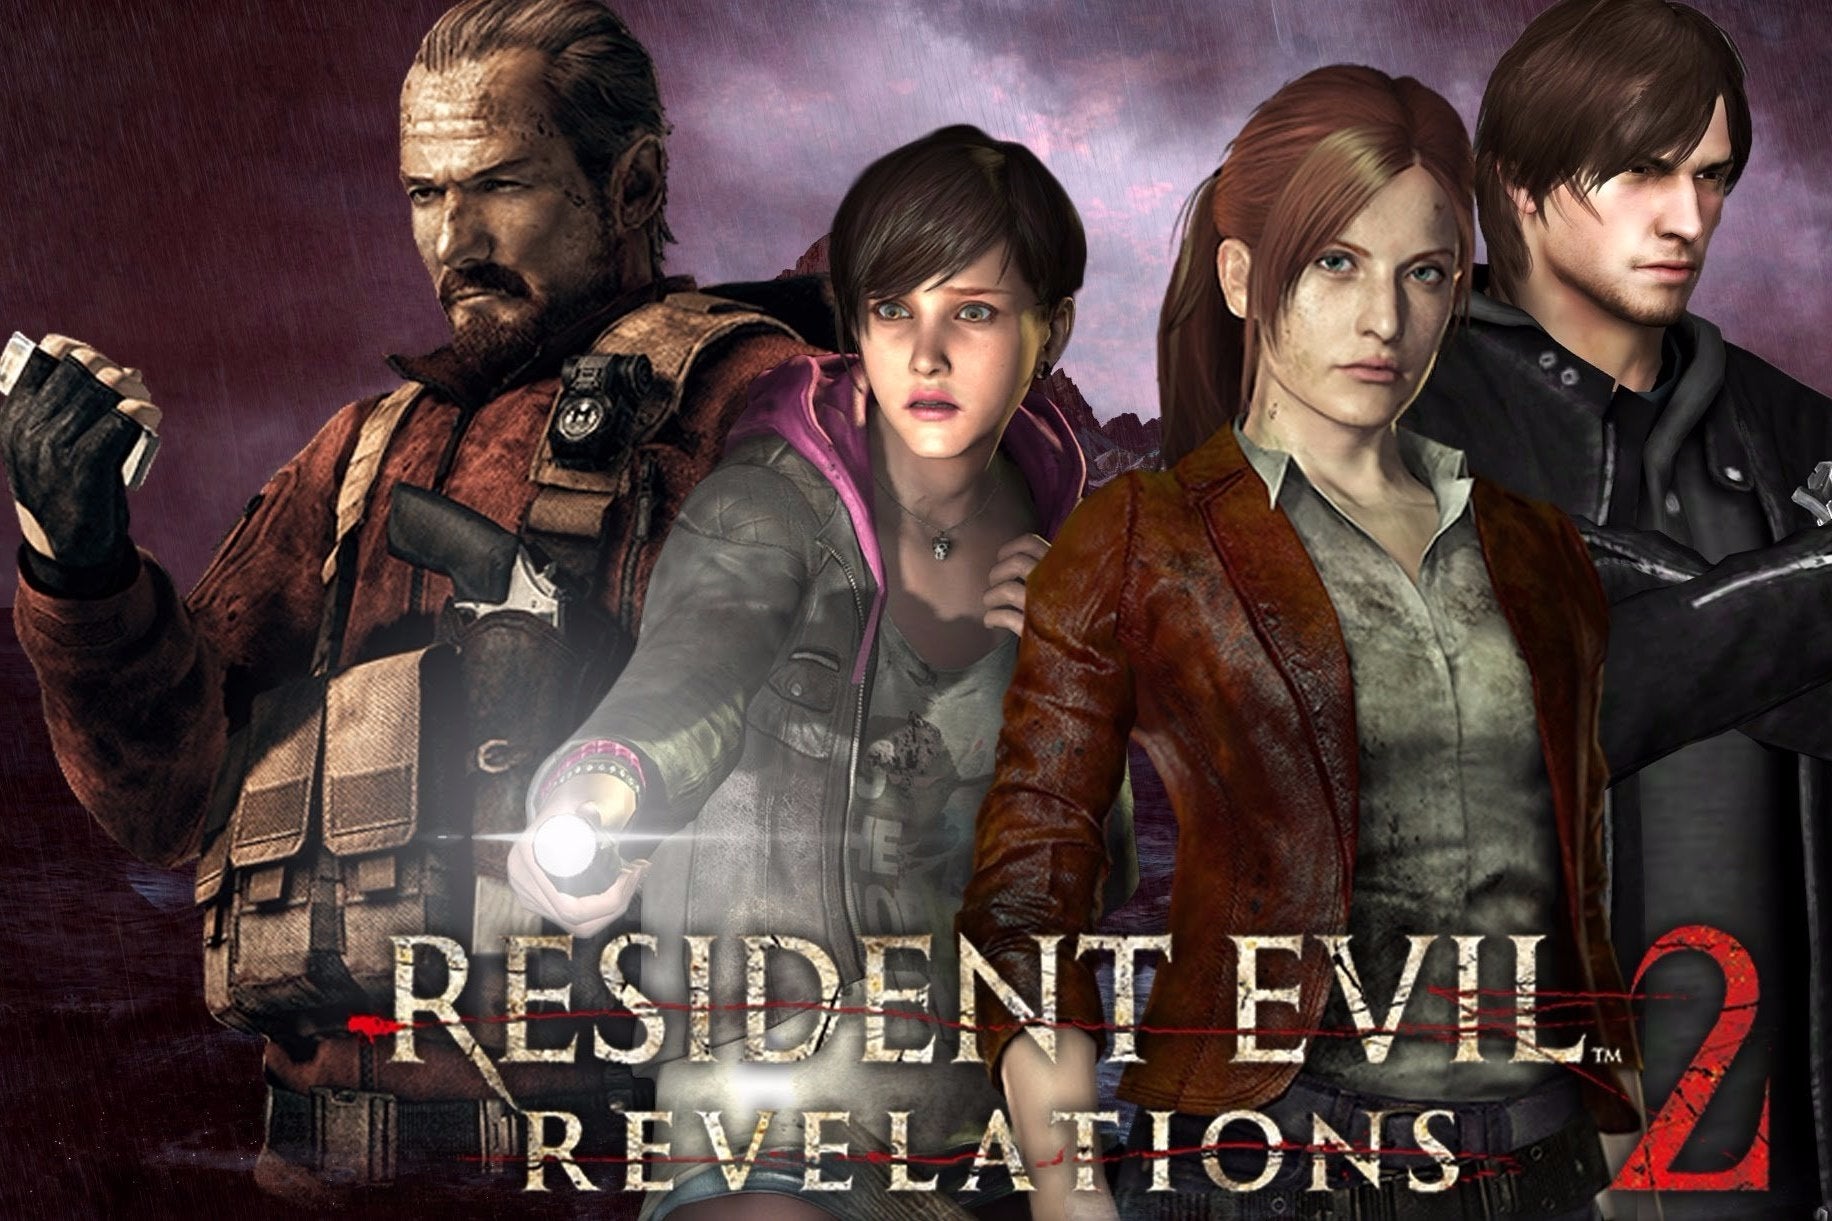 Image for The first episode of Resident Evil Revelations 2 is now free